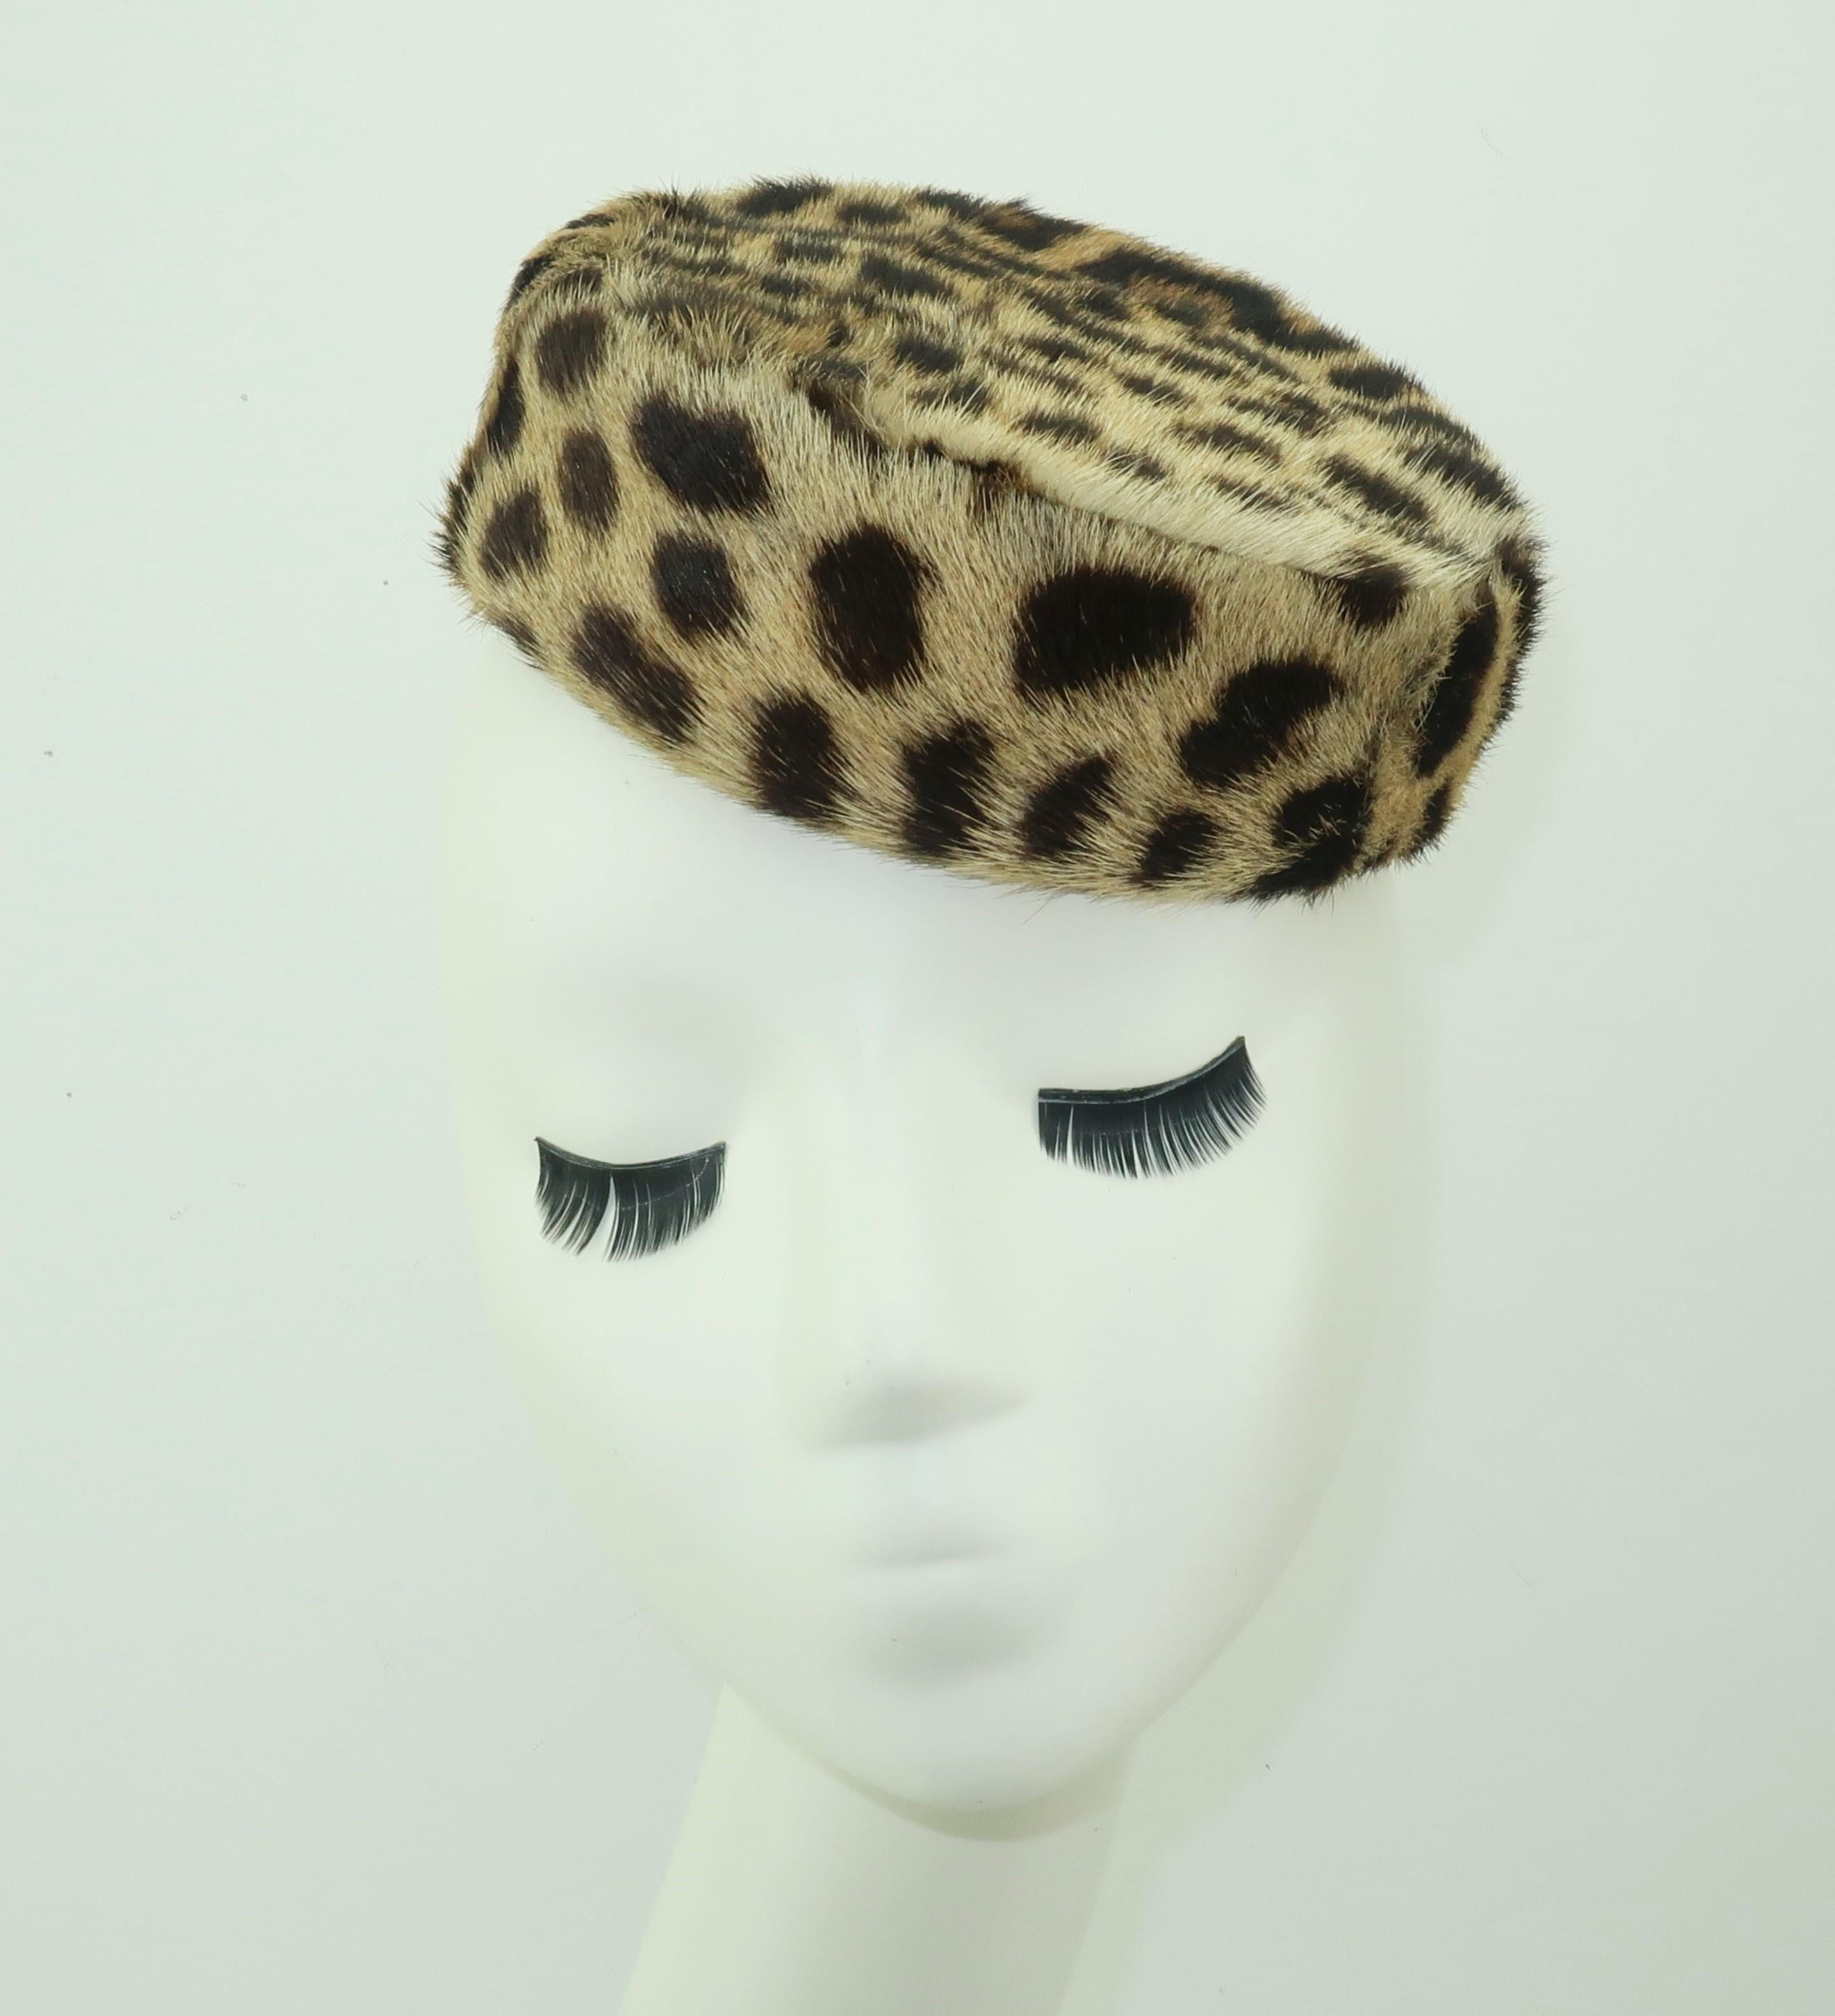 Add a bit of 1960's chic to your wardrobe with this leopard printed fur hat in an iconic pillbox silhouette.  Beautifully lined in black satin and outfitted with two combs for anchoring this purrrfect topper in the right spot.  Wear it like a tilt